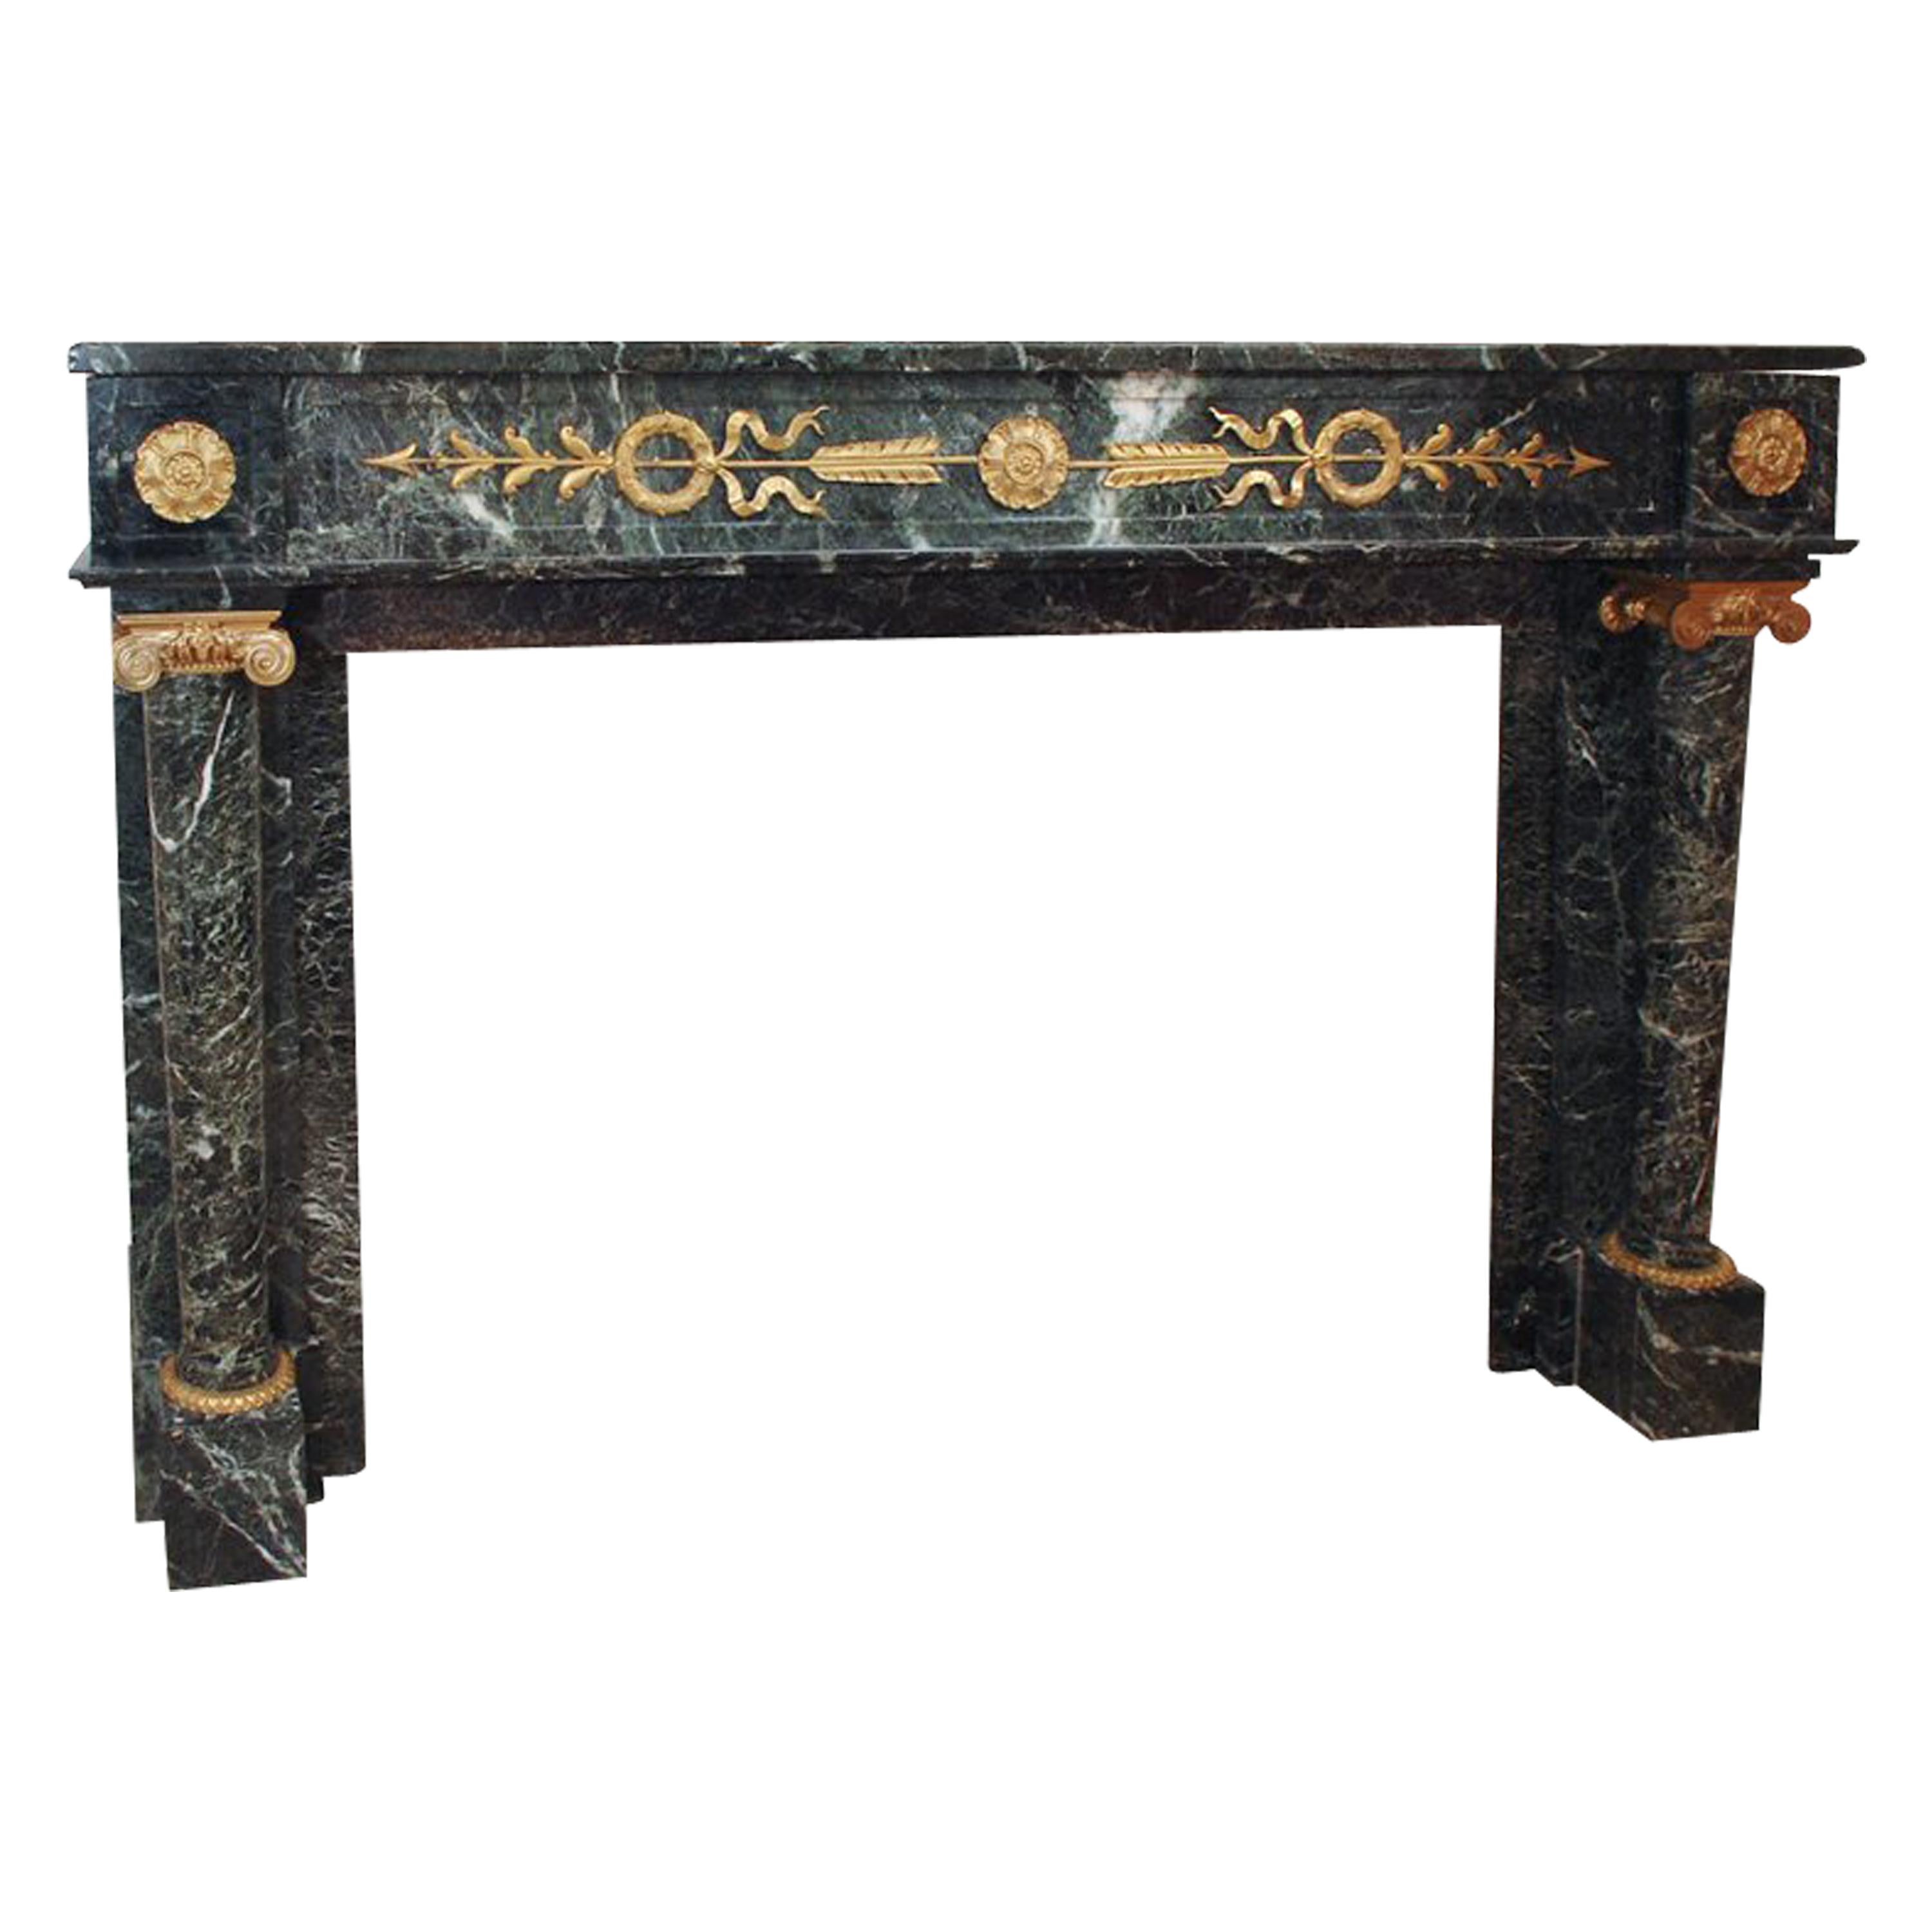 Superb 19th Century Empire bronze mounted mantle For Sale